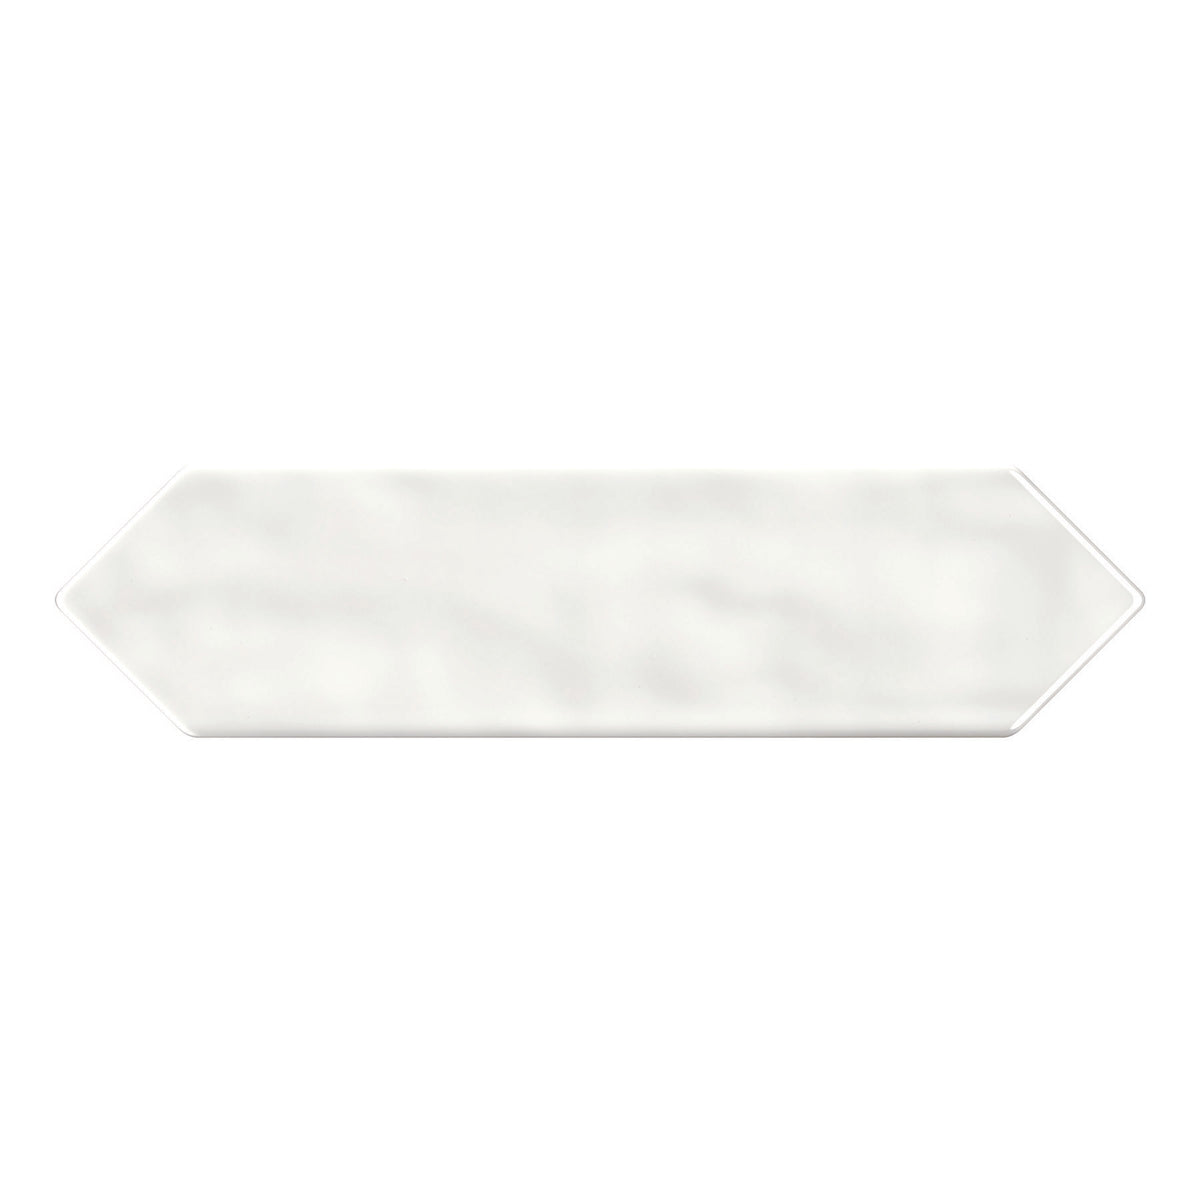 Daltile - Stagecraft - 3 in. x 12 in. Picket Wall Tile - Arctic White 0190